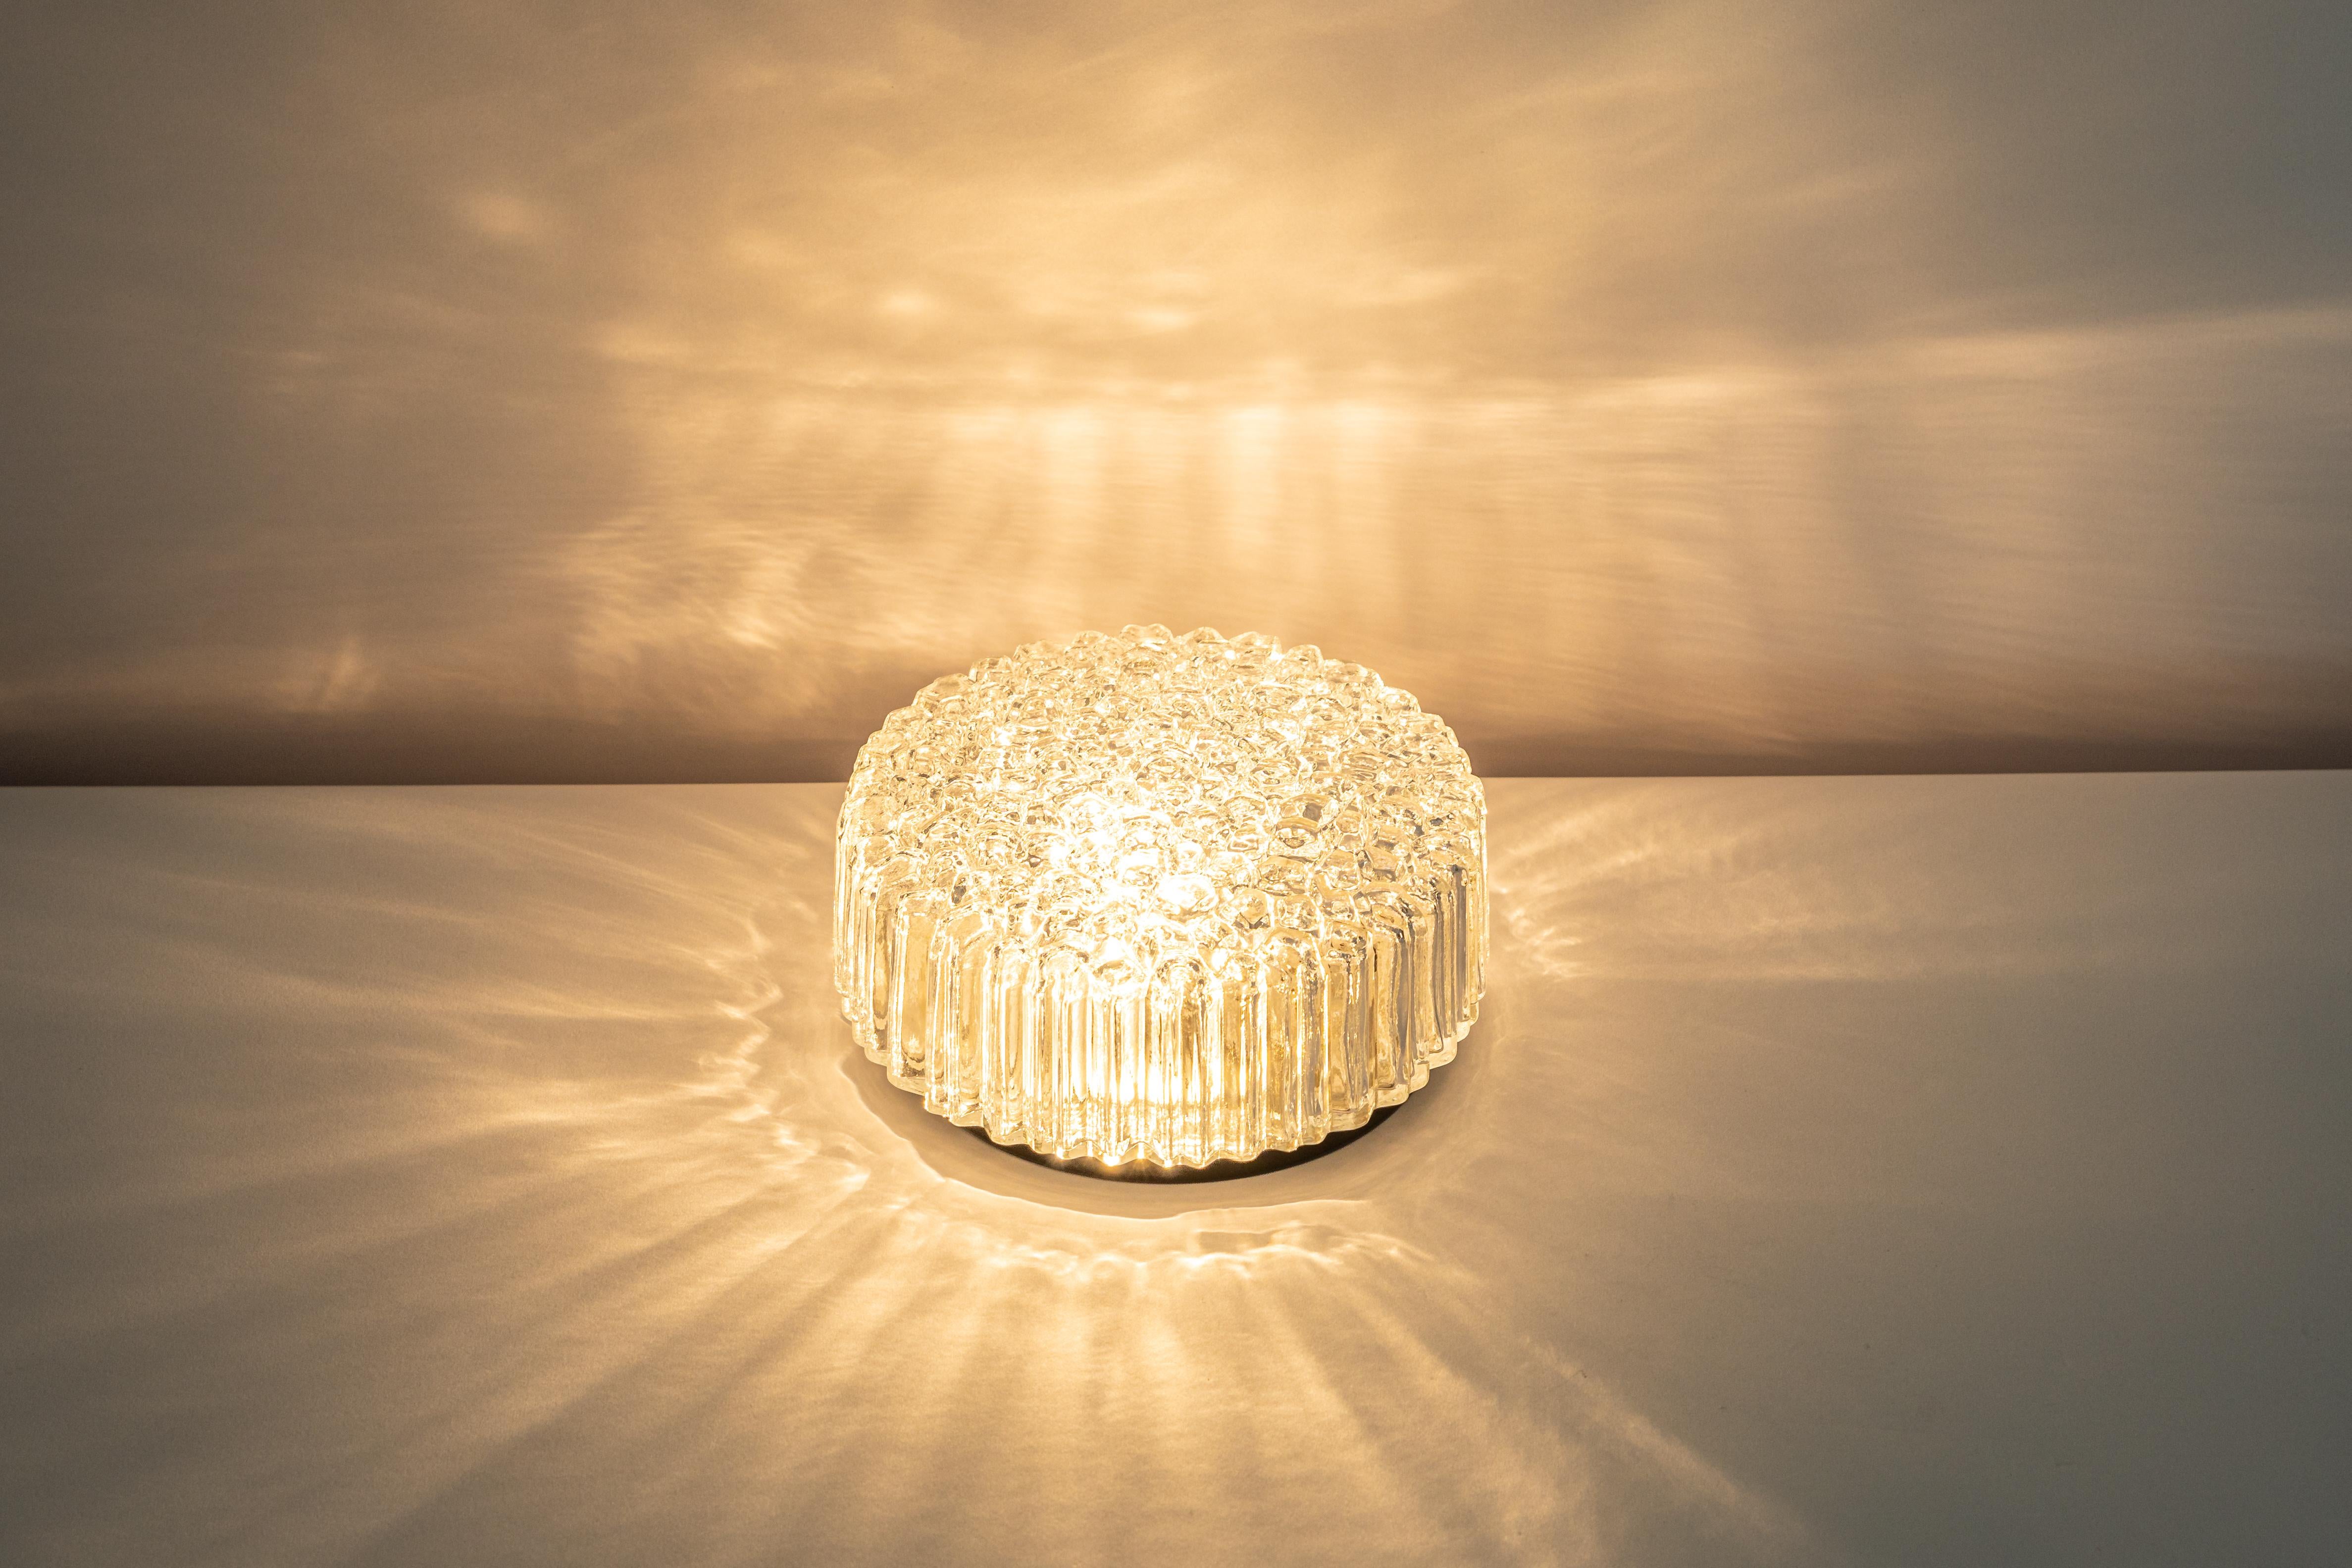 1 of 4 wonderful round glass wall lights by Limburg, Germany, 1970s.
Thick textured Glass fixtured on a black metal base.

Good quality and condition. Cleaned, well-wired, and ready to use. 

Each fixture requires 1 x E27 standard bulbs with